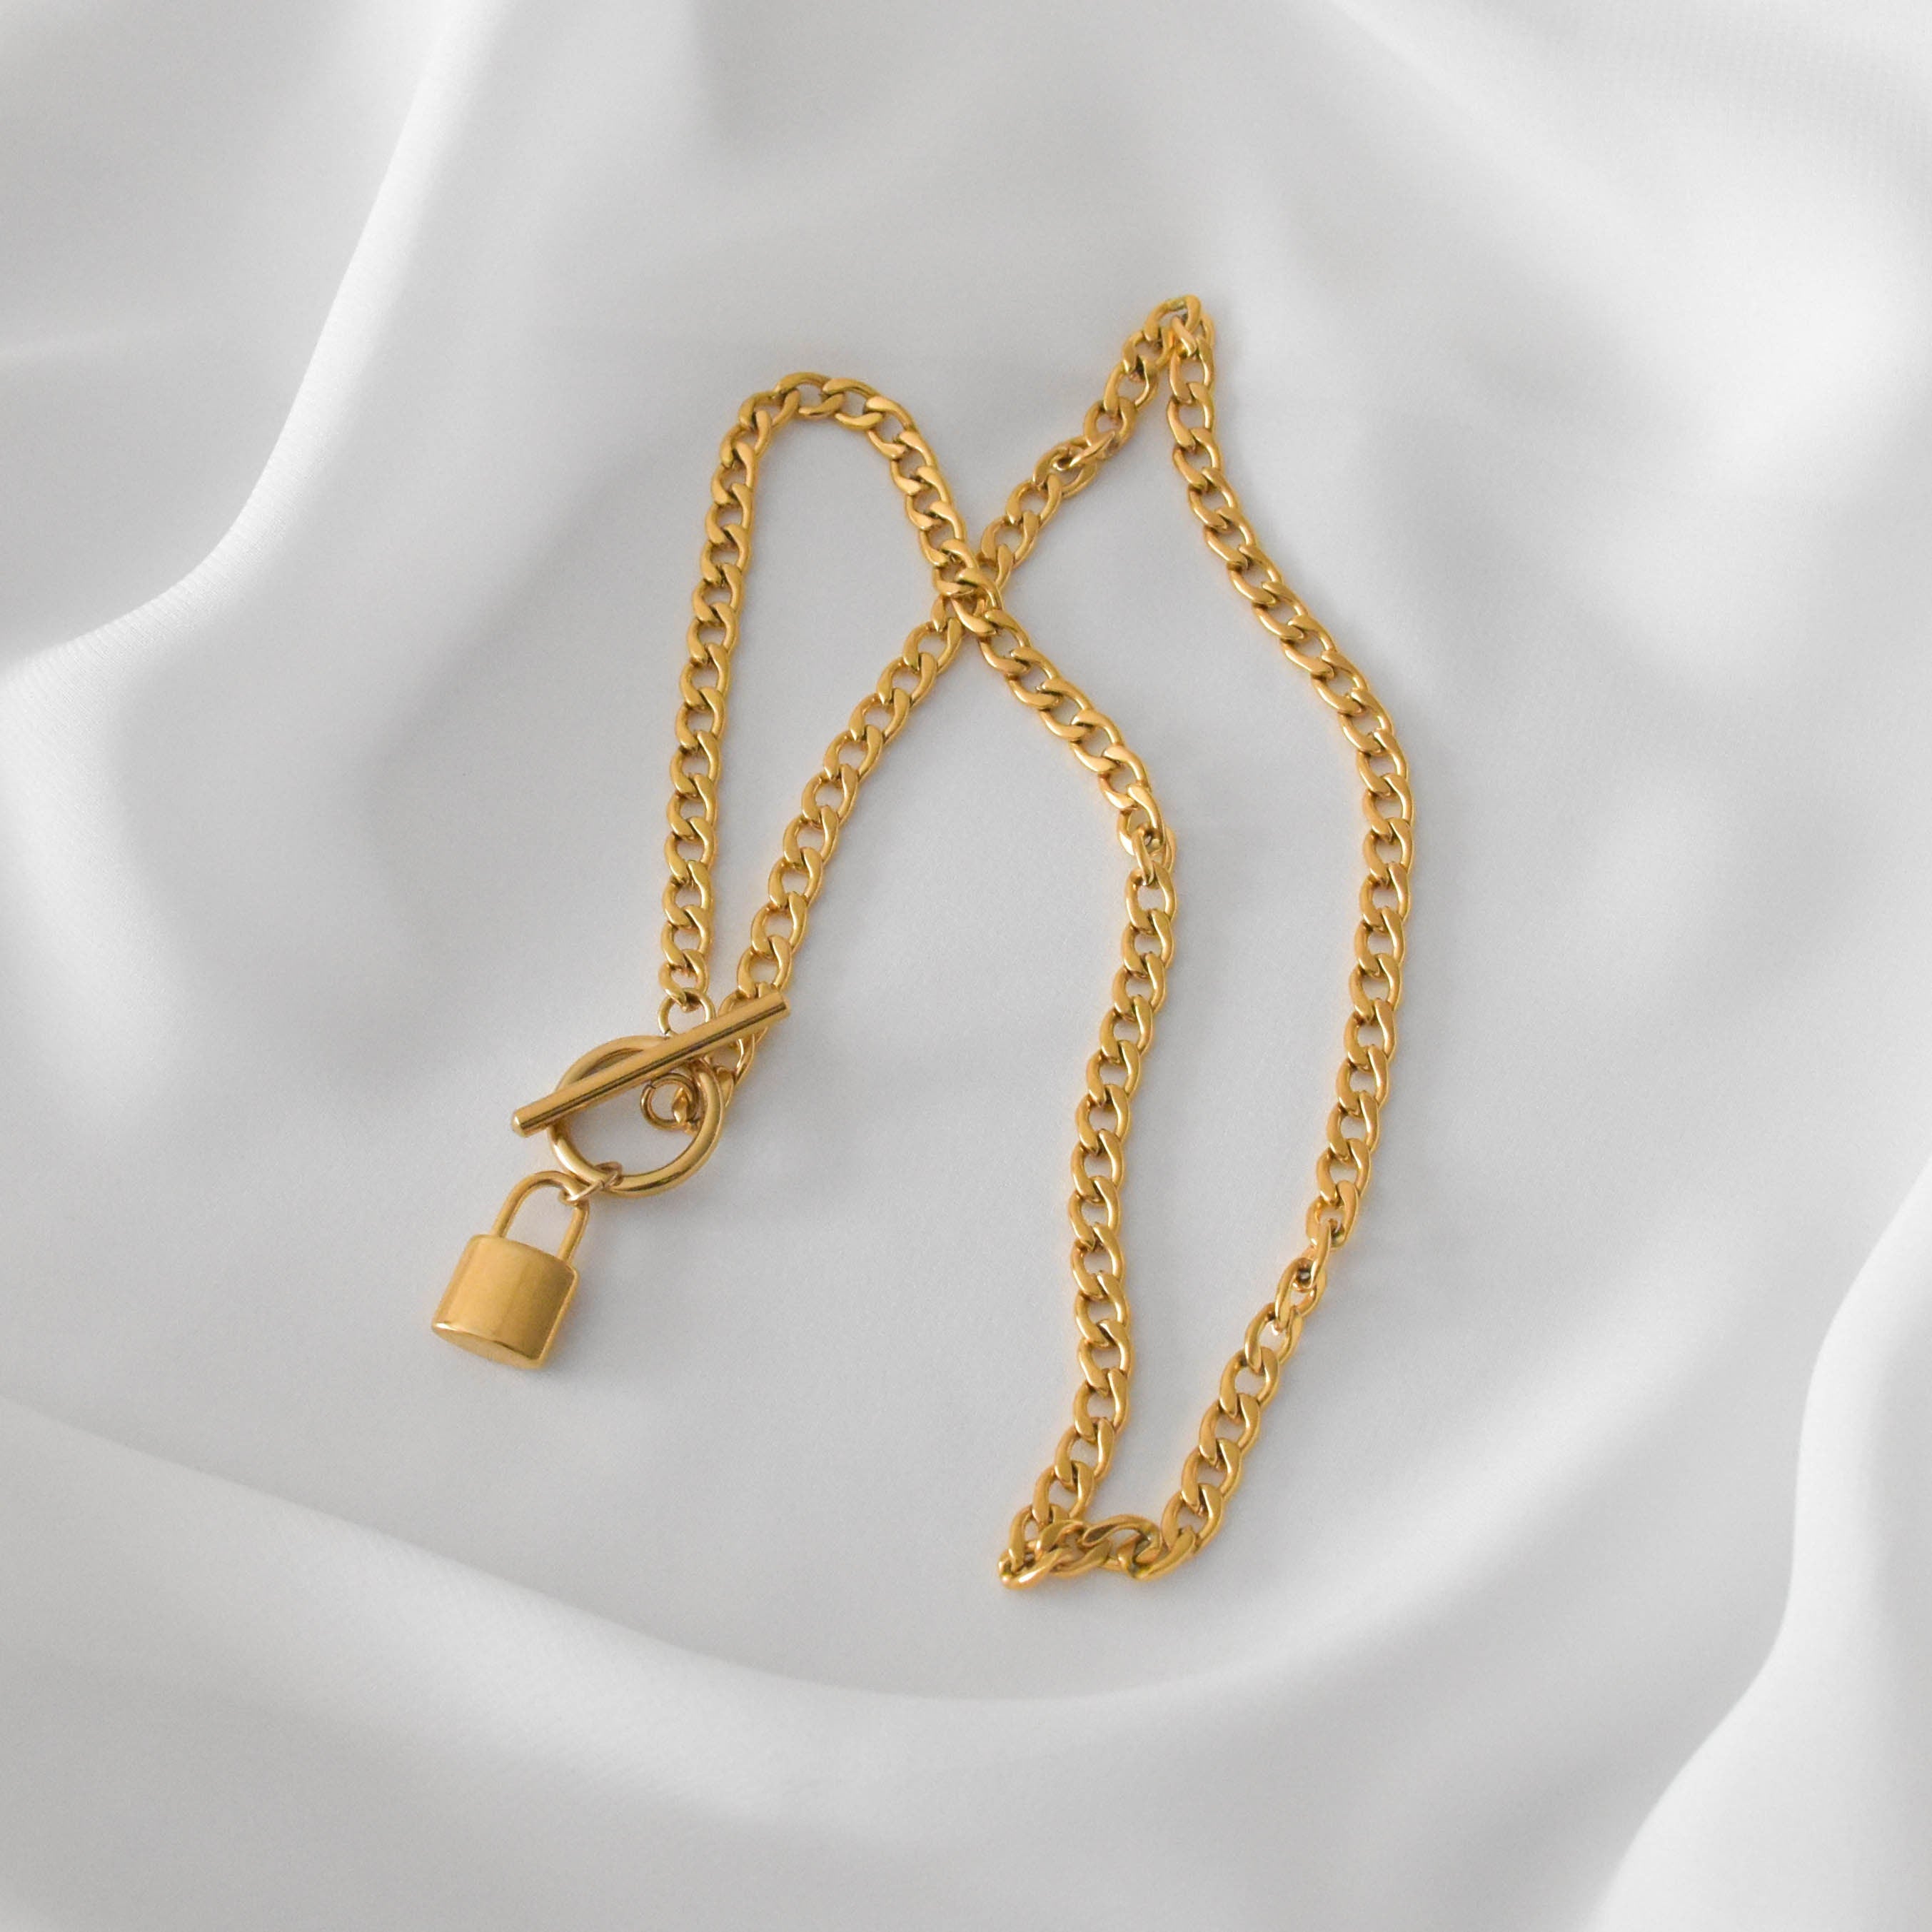 14K Yellow Gold Lock & Key Charm Necklace with Bar and Toggle